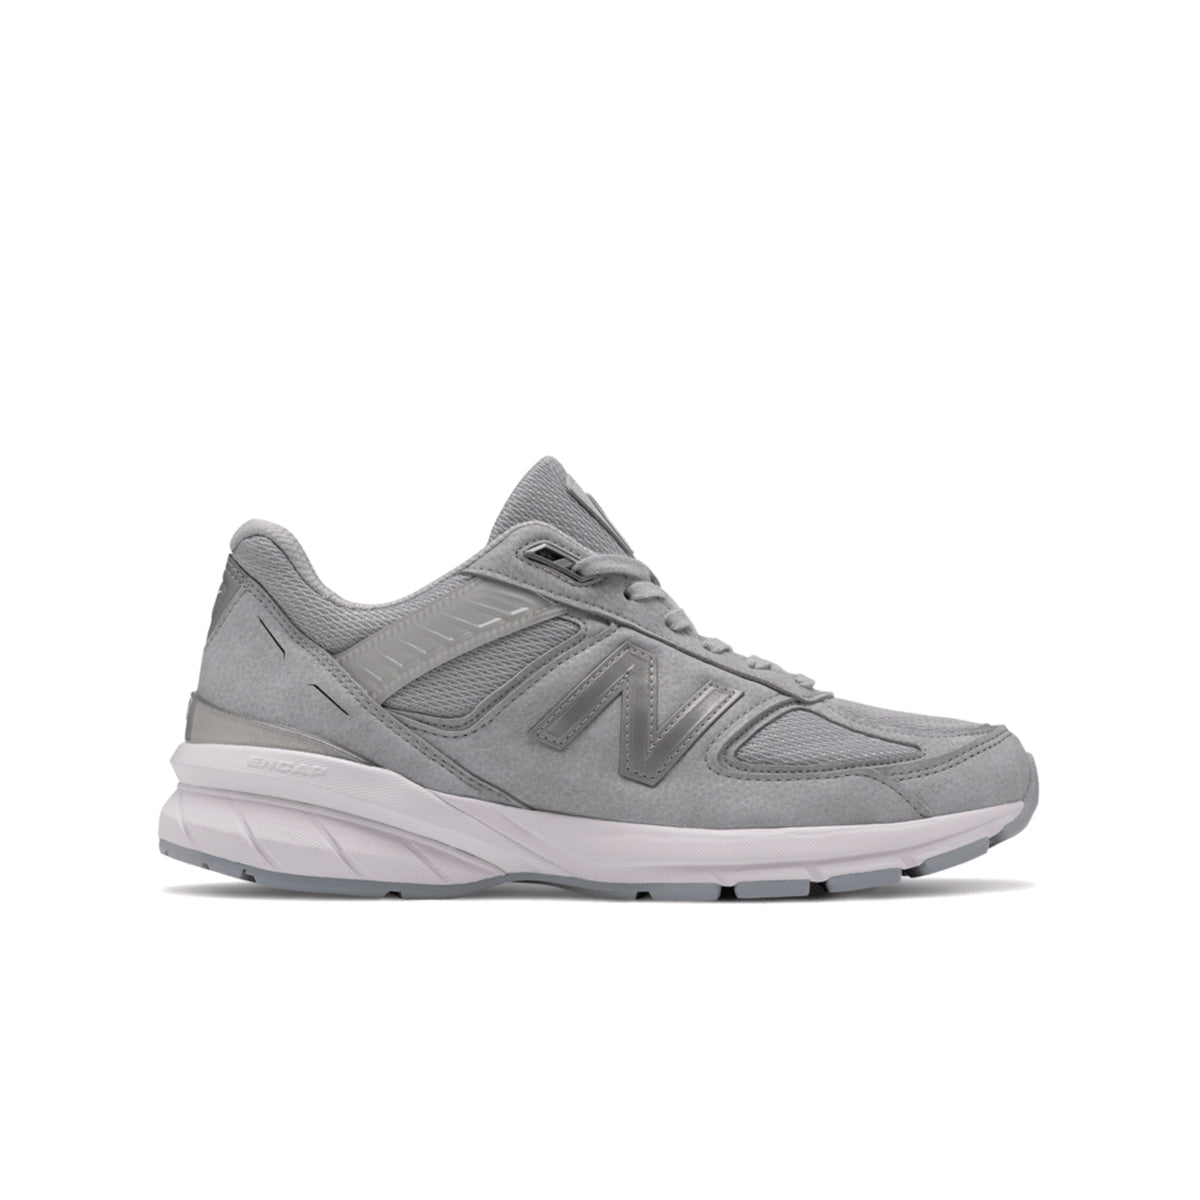 just keep going | New balance shoes, Sneakers fashion, Urban shoes